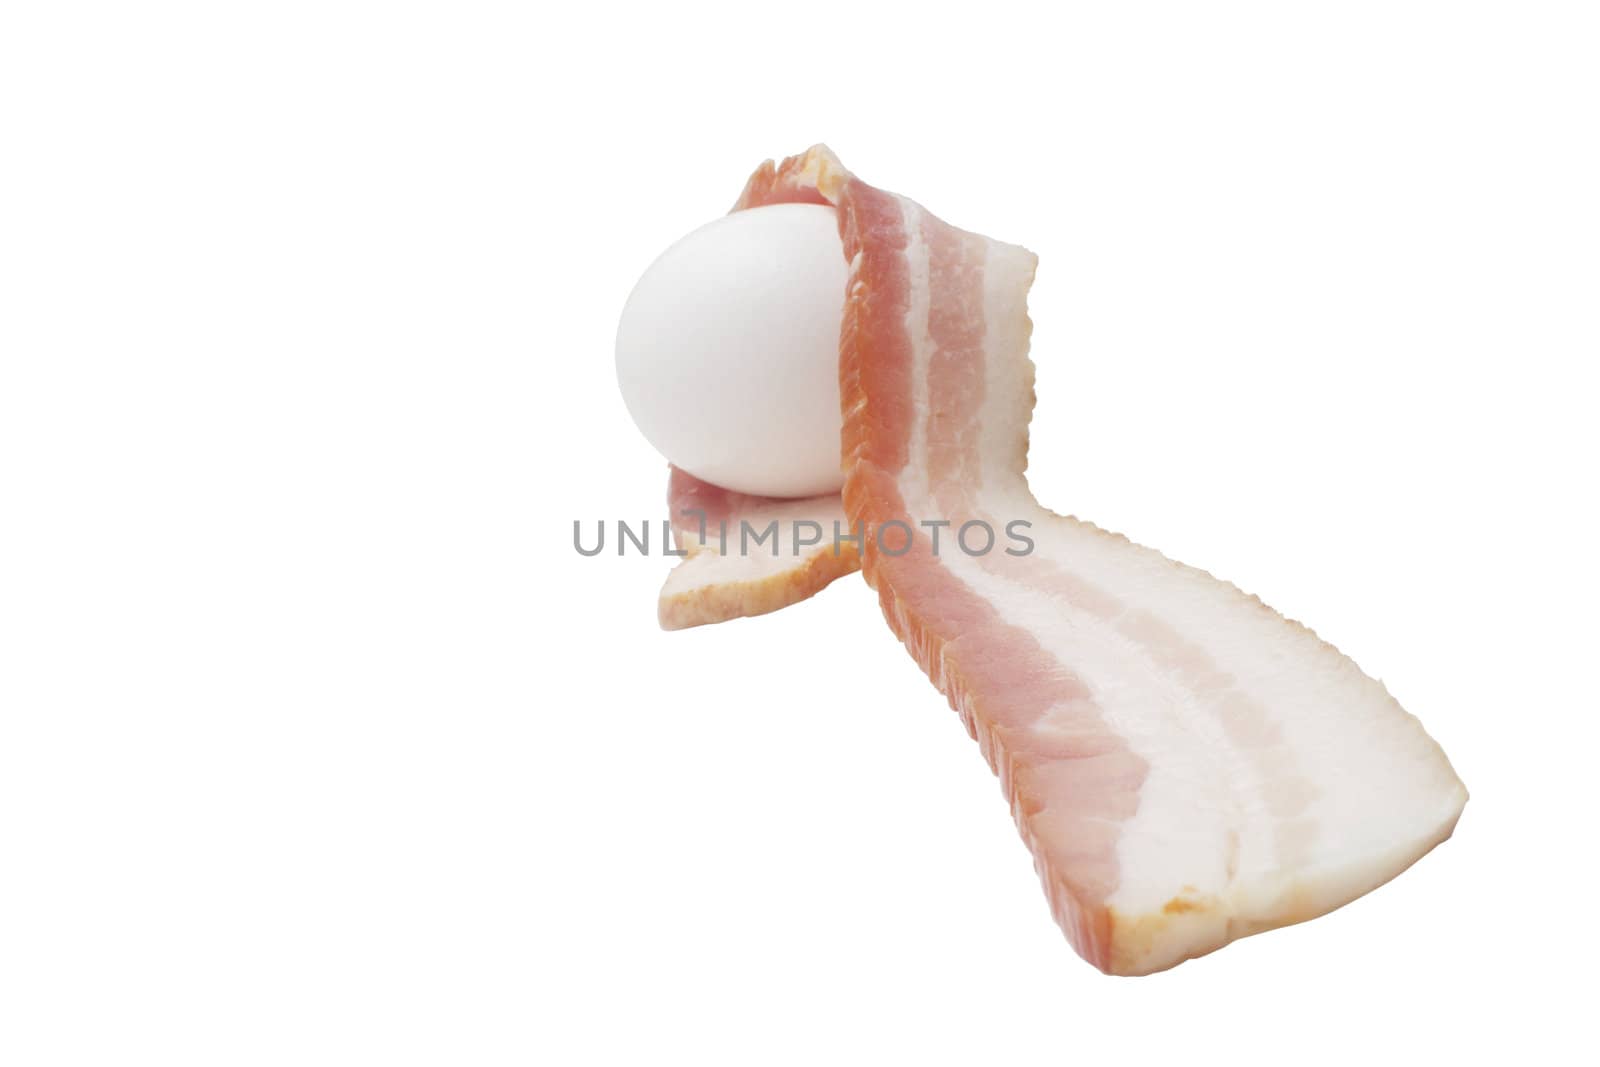 Raw egg and a slice of bacon on white background by pulen